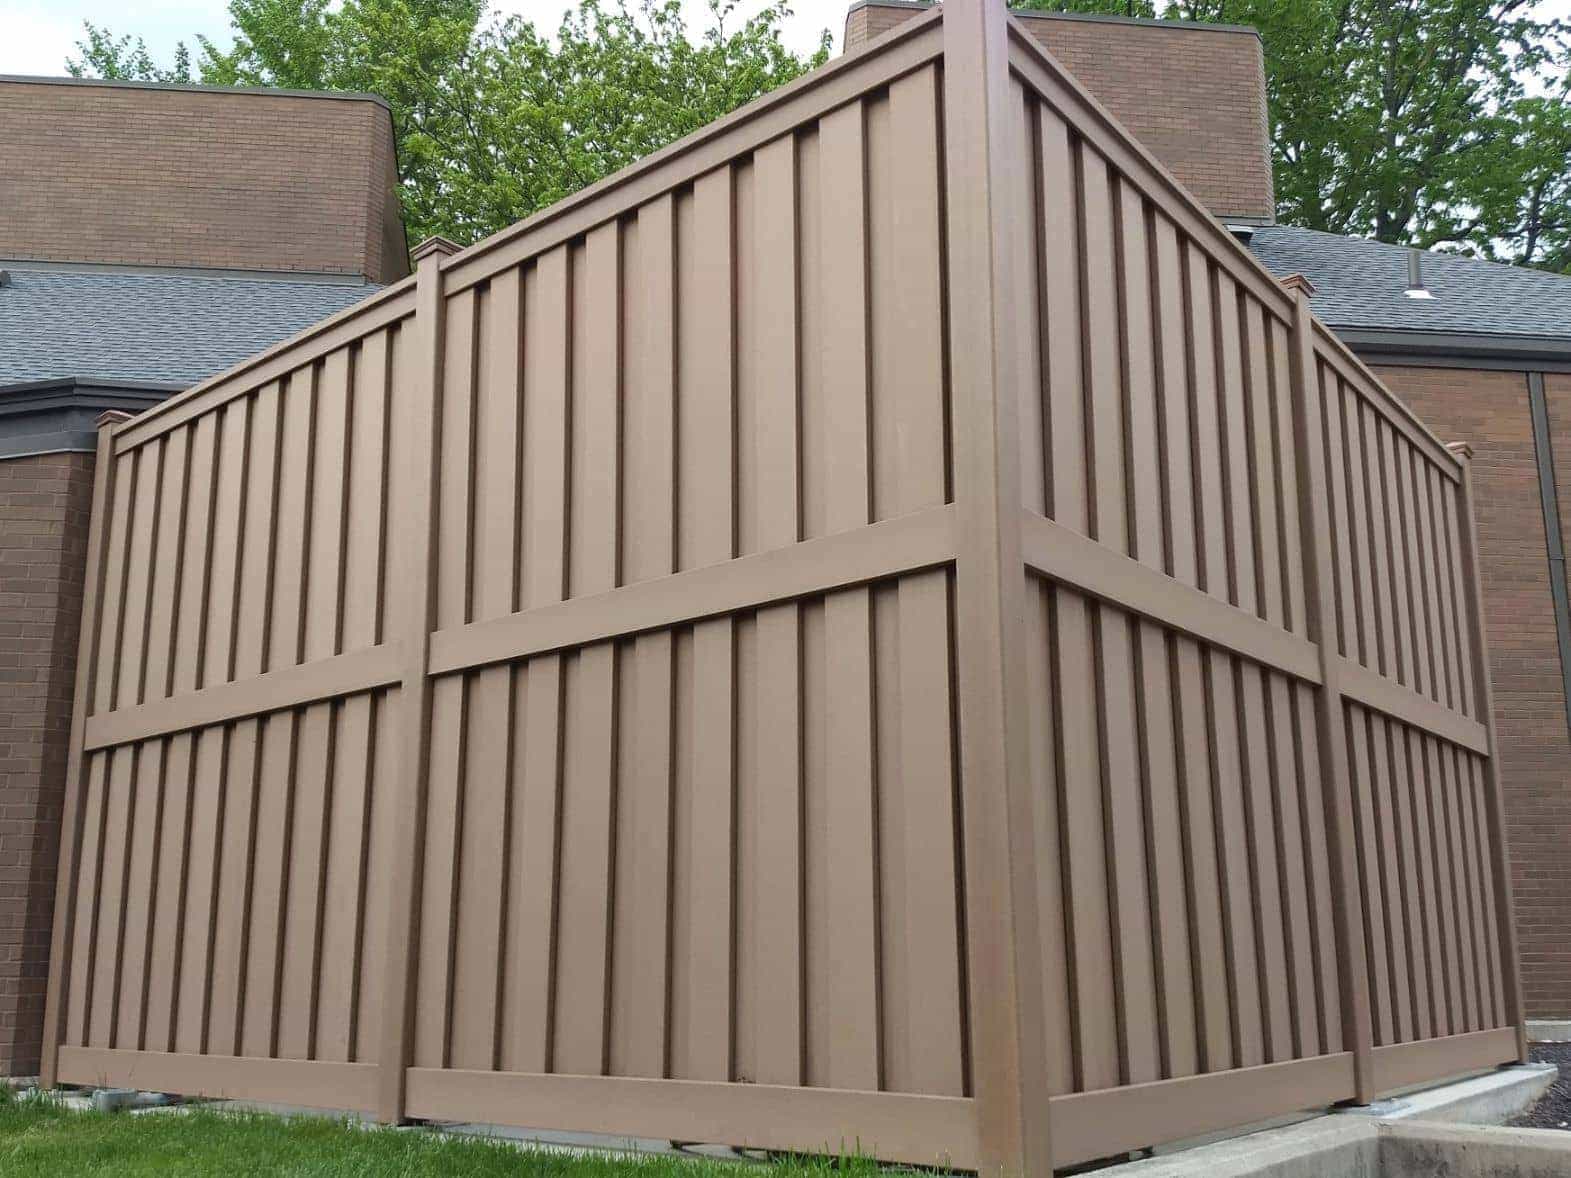 A 10 foot tall Trex privacy fence for a university housing HVAC enclosure